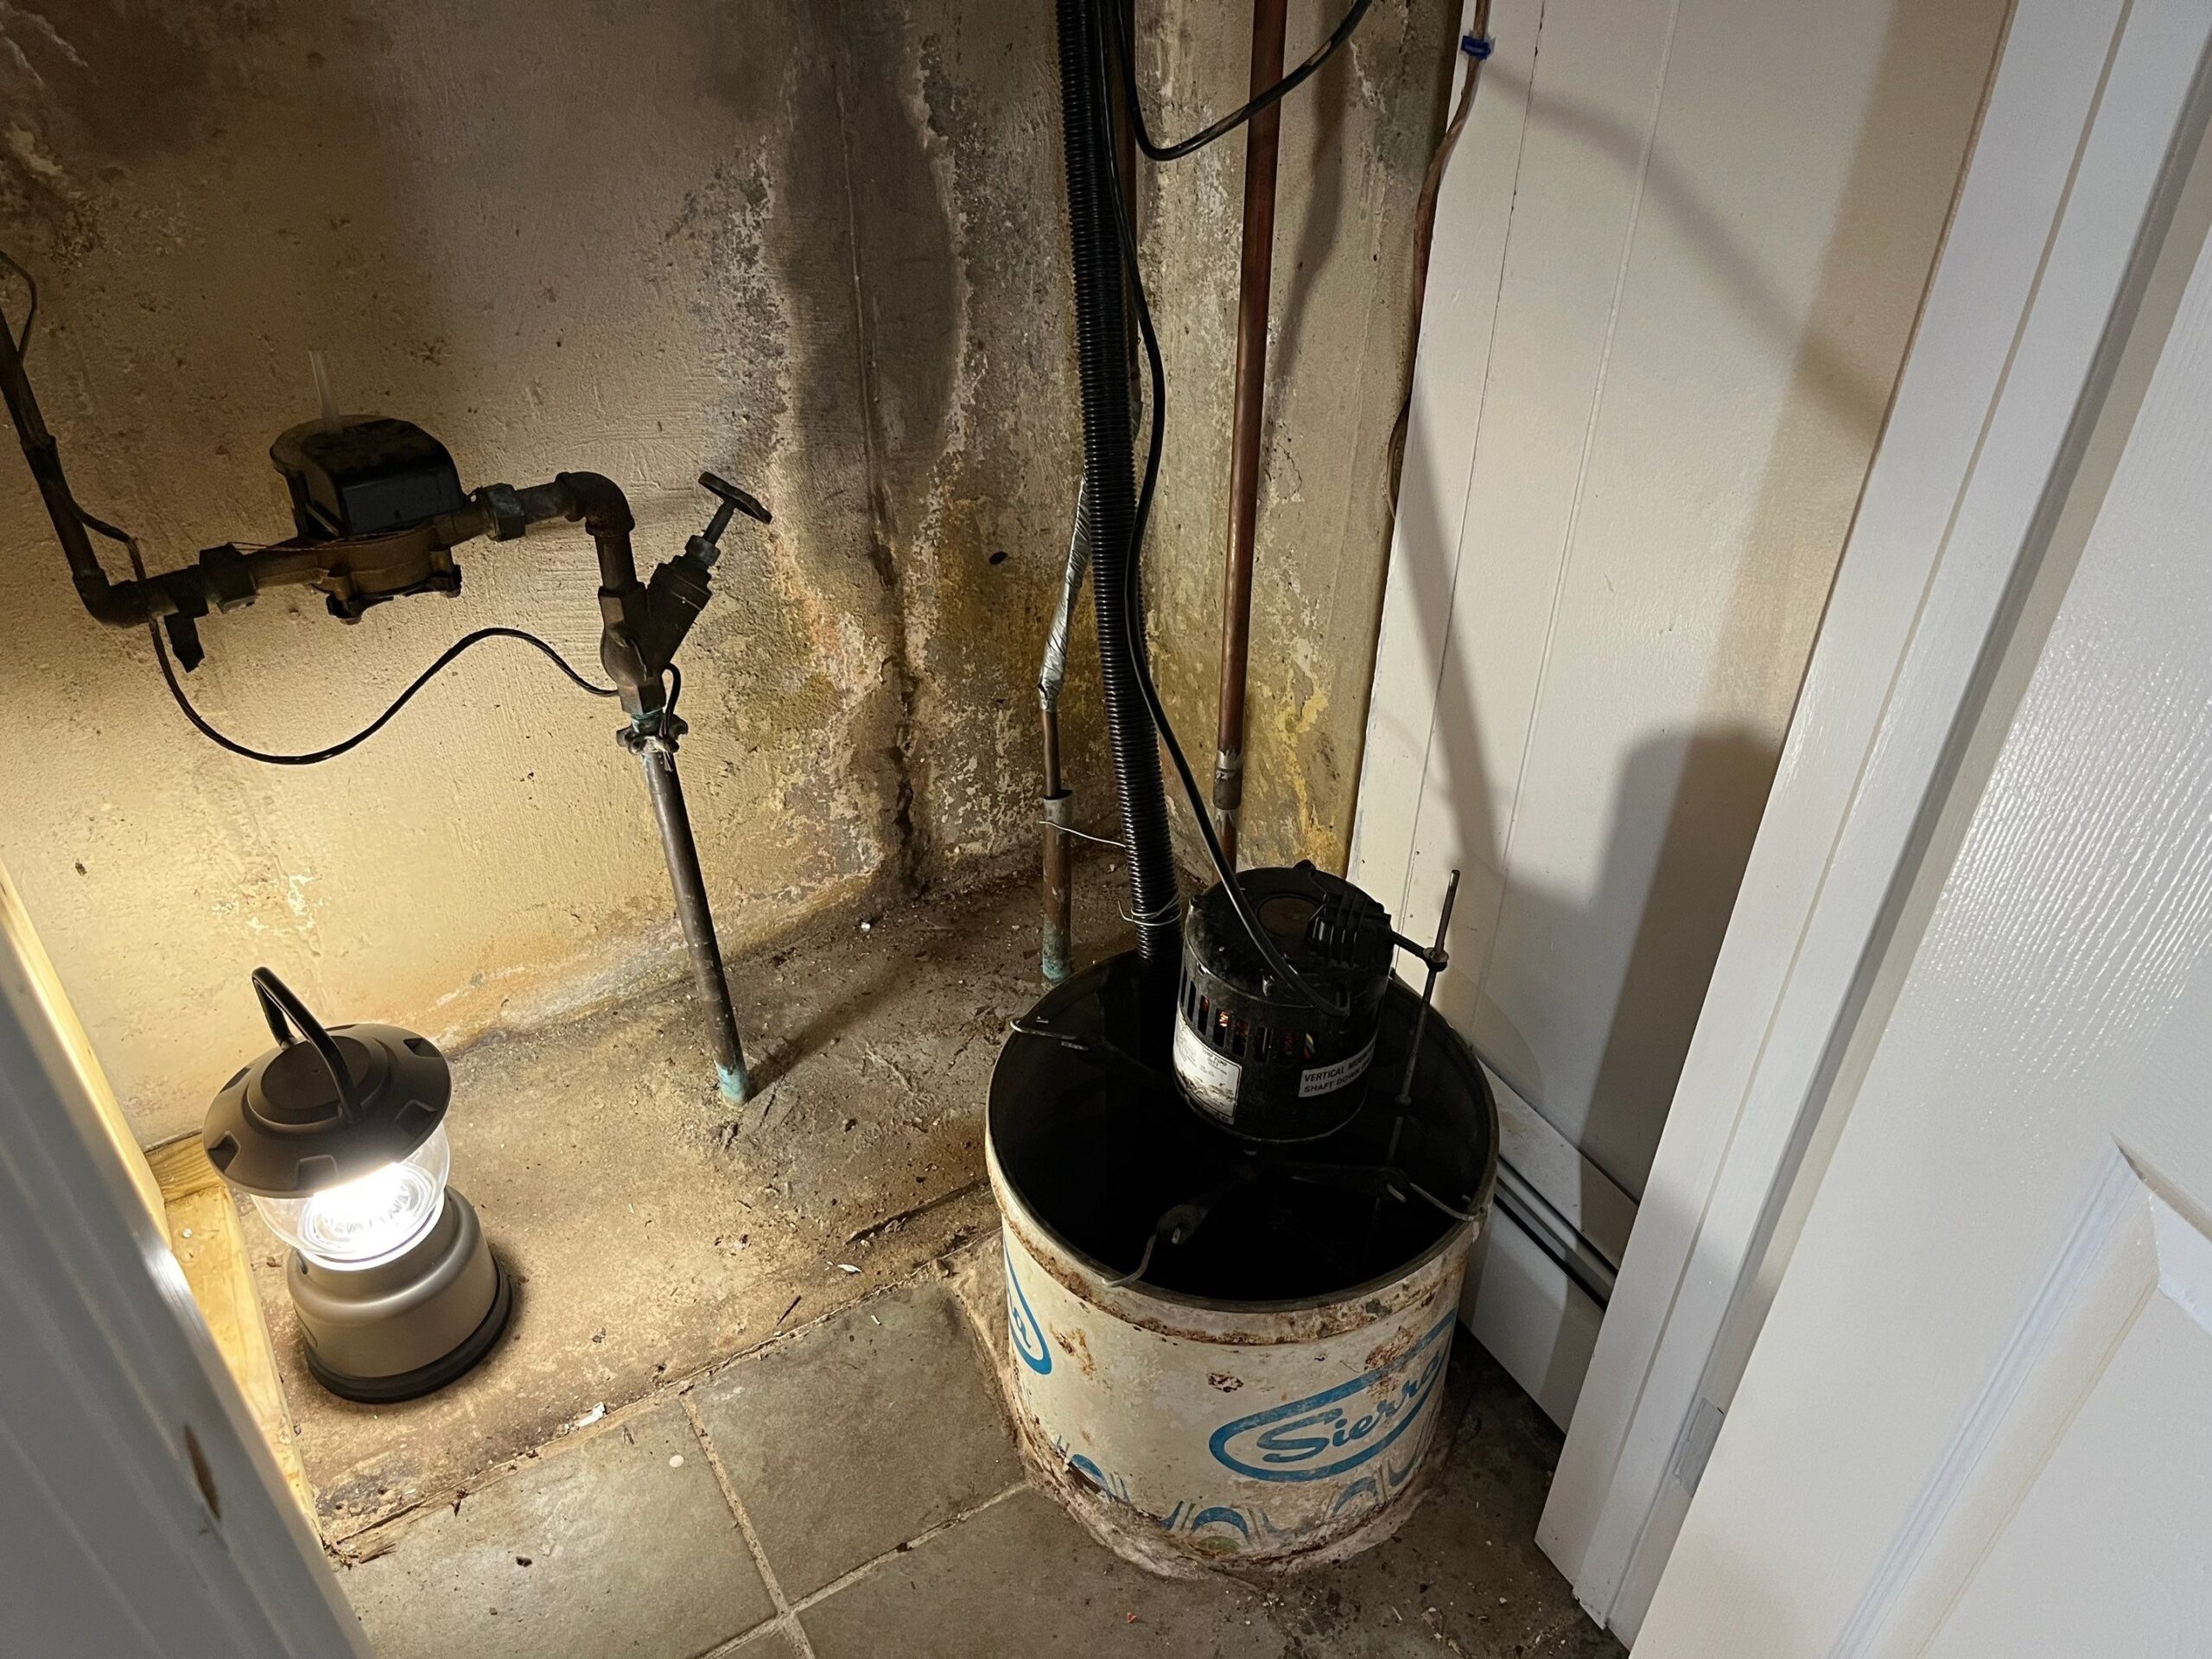 Buying a Home with a Sump Pump?